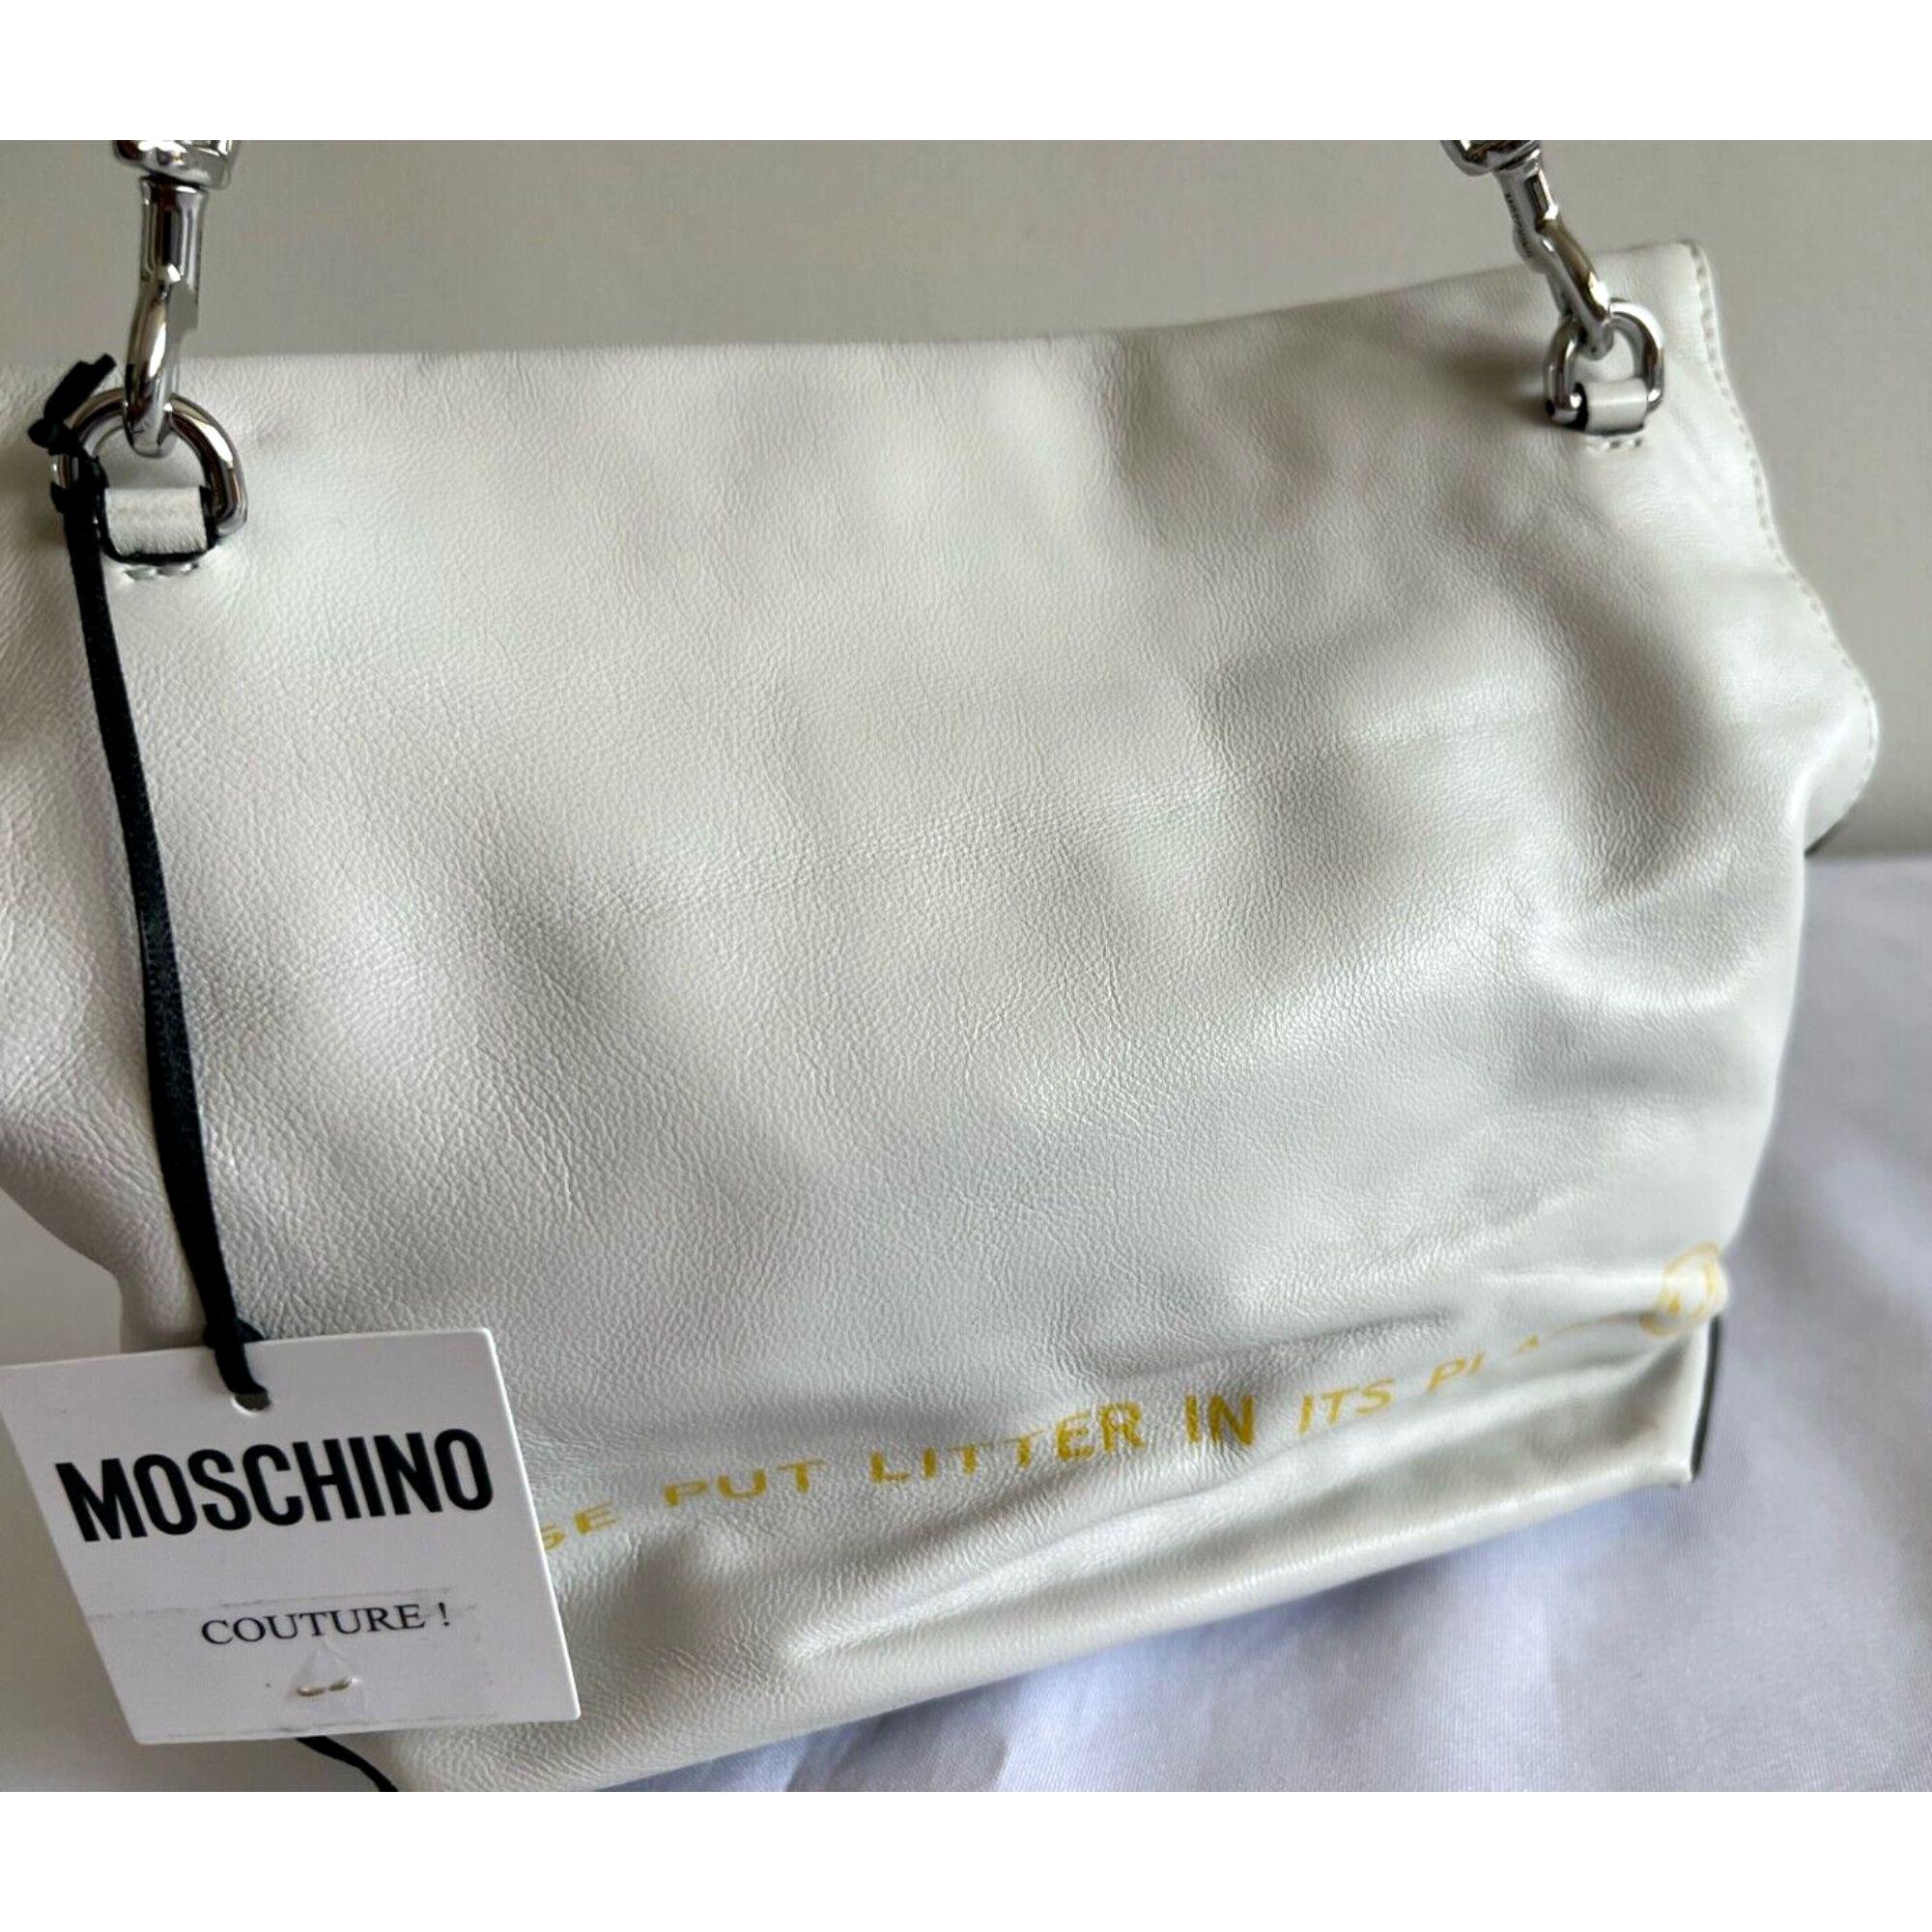 SS22 Moschino Couture The Diner White Leather Lunch Bag Hamburger For Sale 5